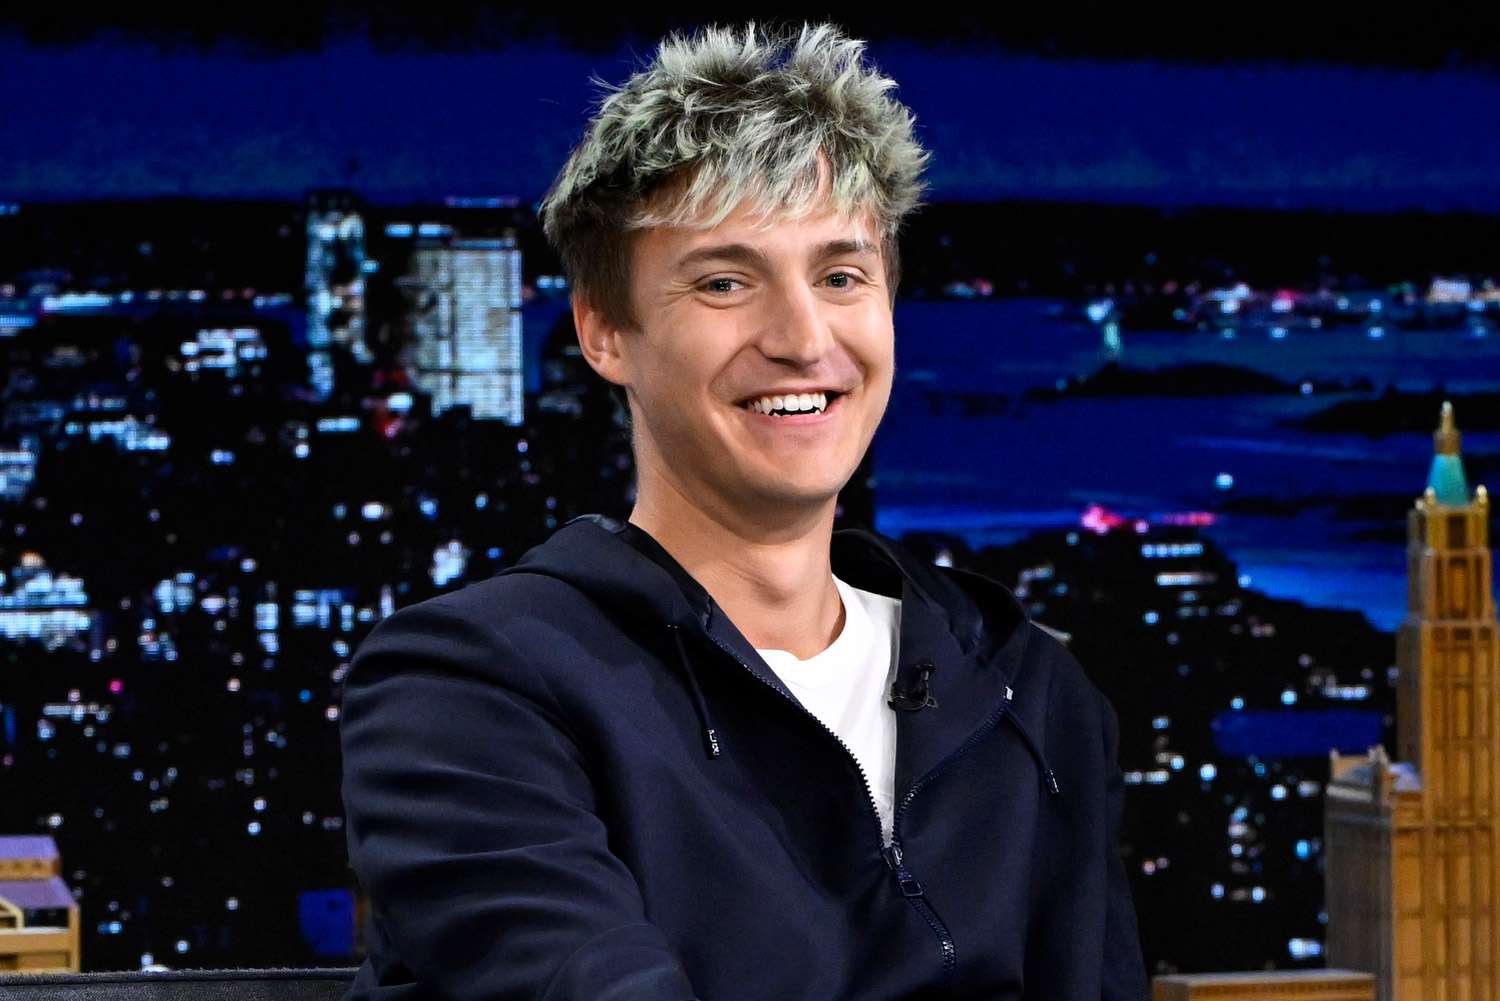 Twitch Streamer Ninja Reveals He’s Officially Cancer-Free: ‘Thank You’ [Video]